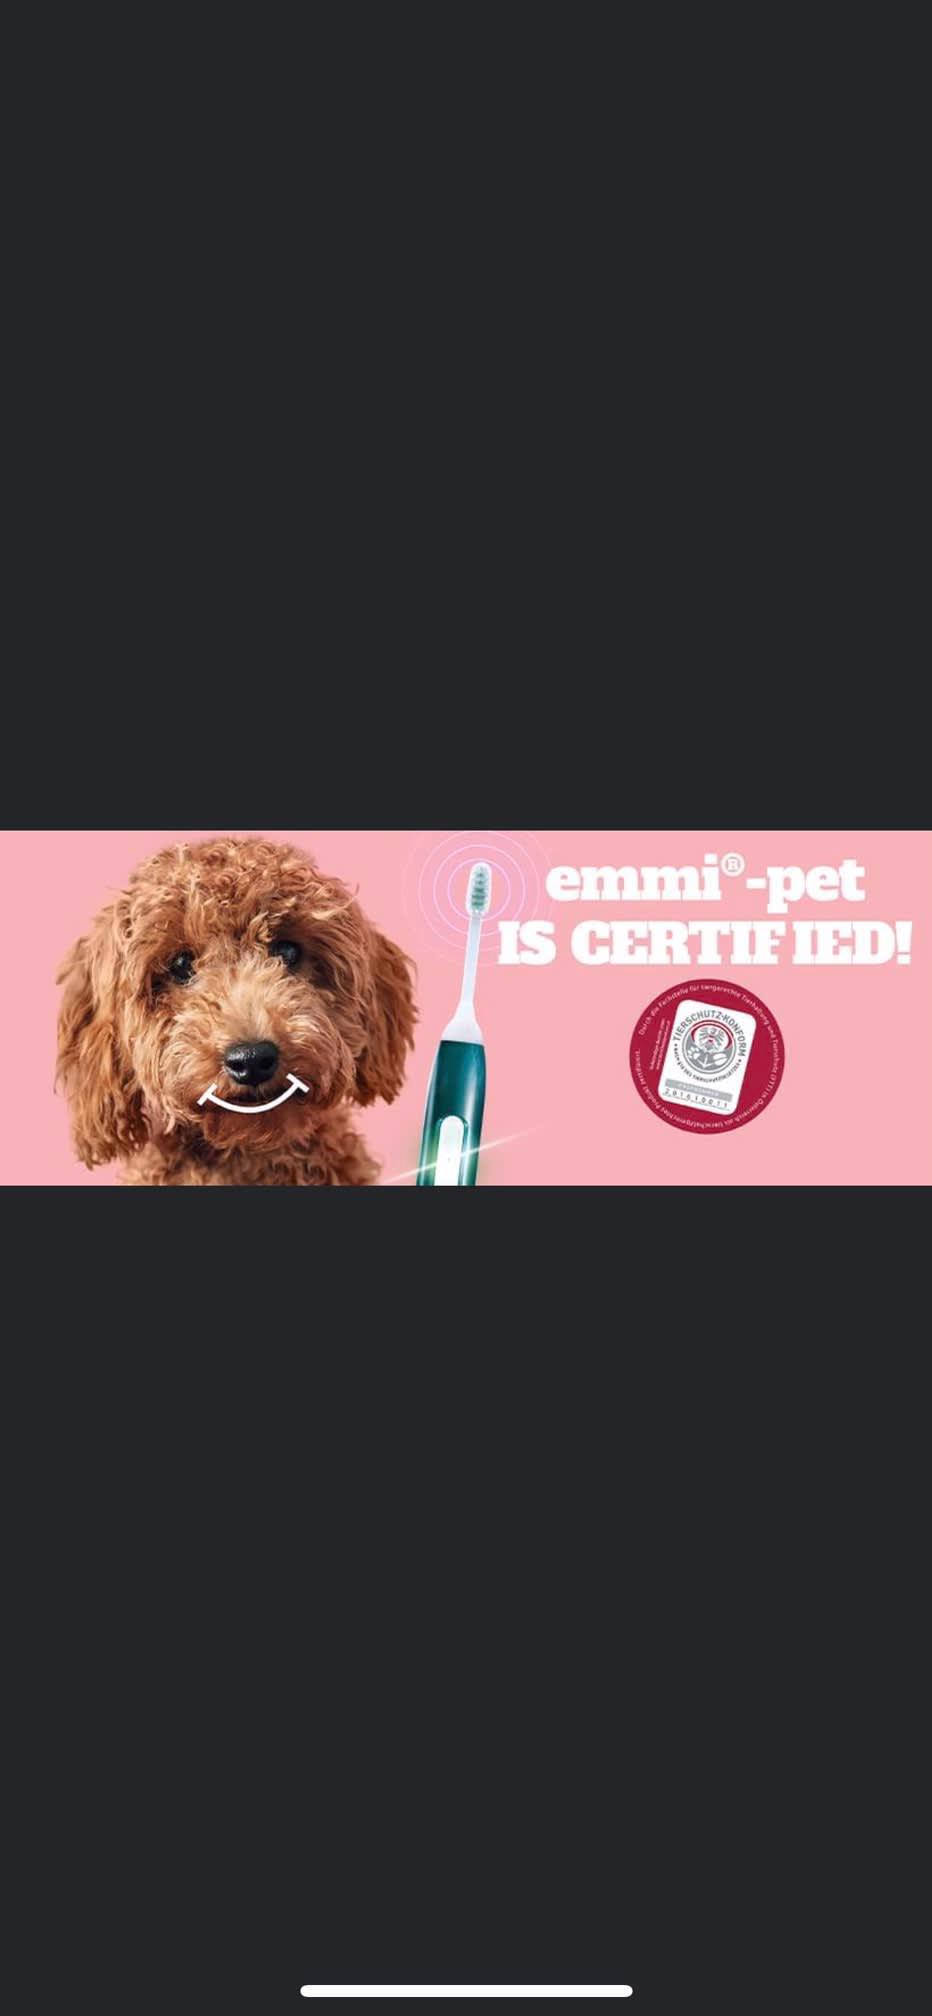 Images Emmipet - Ultrasonic Doggy Dentals by Diamonddax